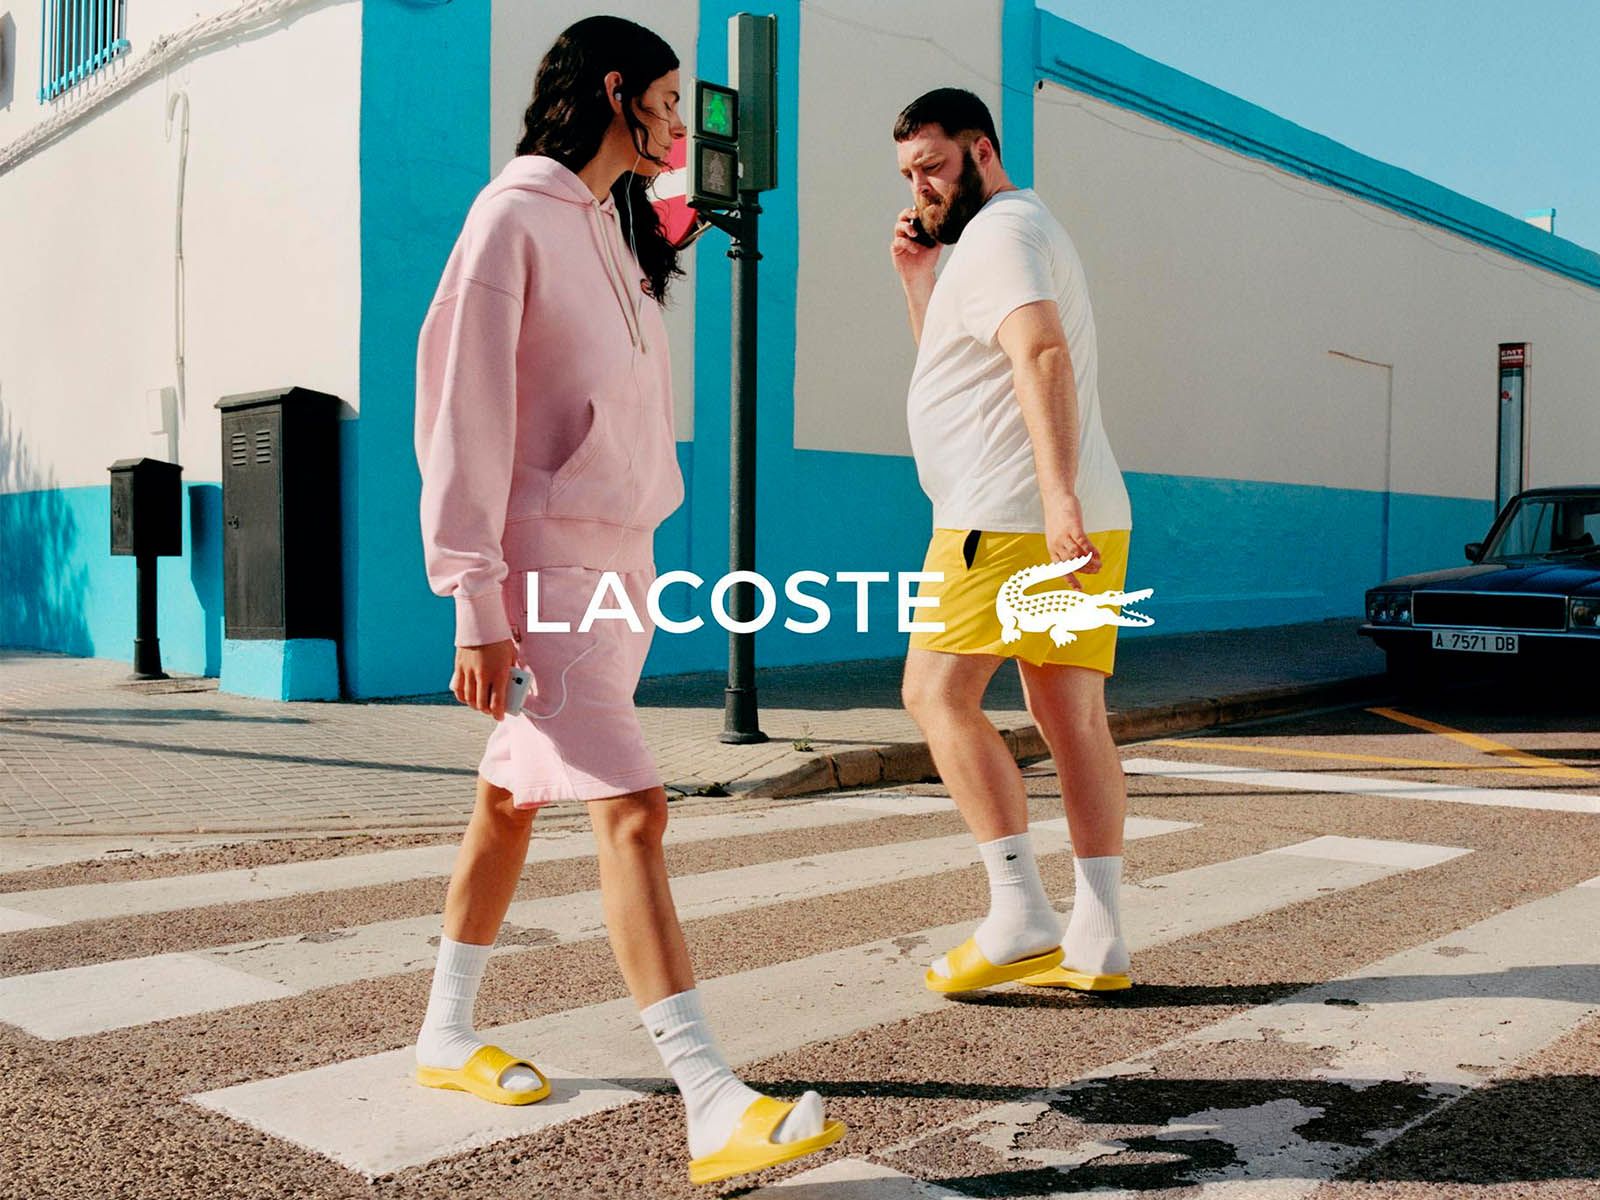 Unexpected encounters in the new Lacoste campaign